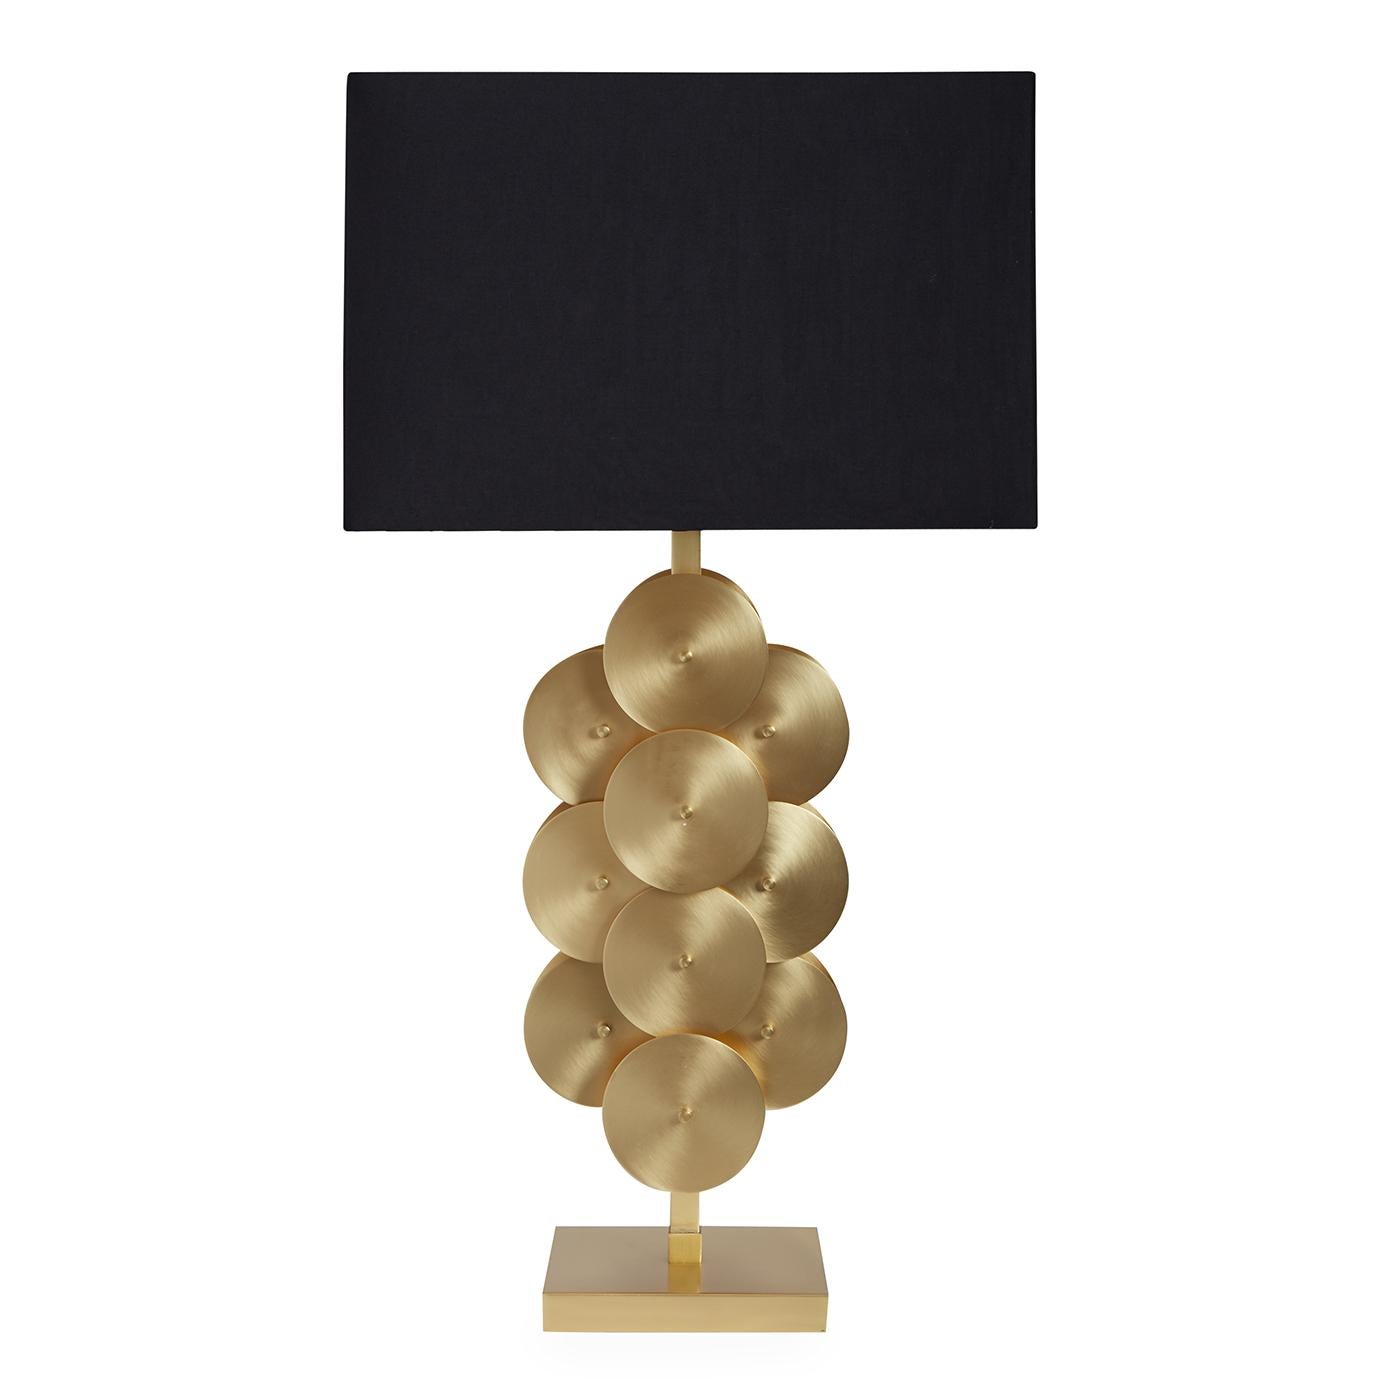 Architectural modernism. A new take on our original house-of-cards-inspired design, our Puzzle Circles Table Lamp is made of brushed brass discs layered in a dynamic composition and is topped with a silky black shade. The architectural modernist